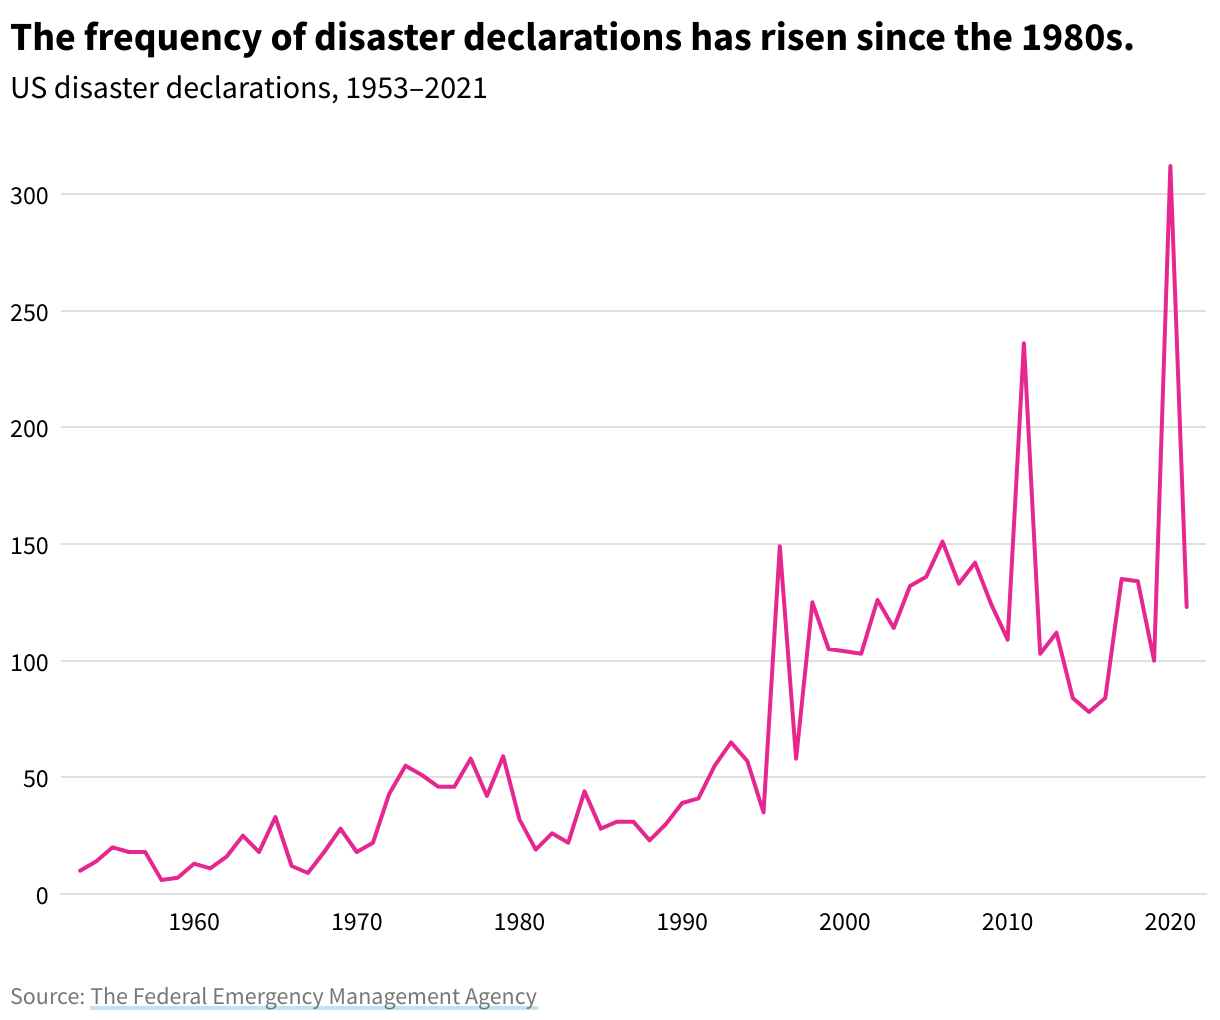 A line chart showing US disaster declarations from 1953 to 2021.